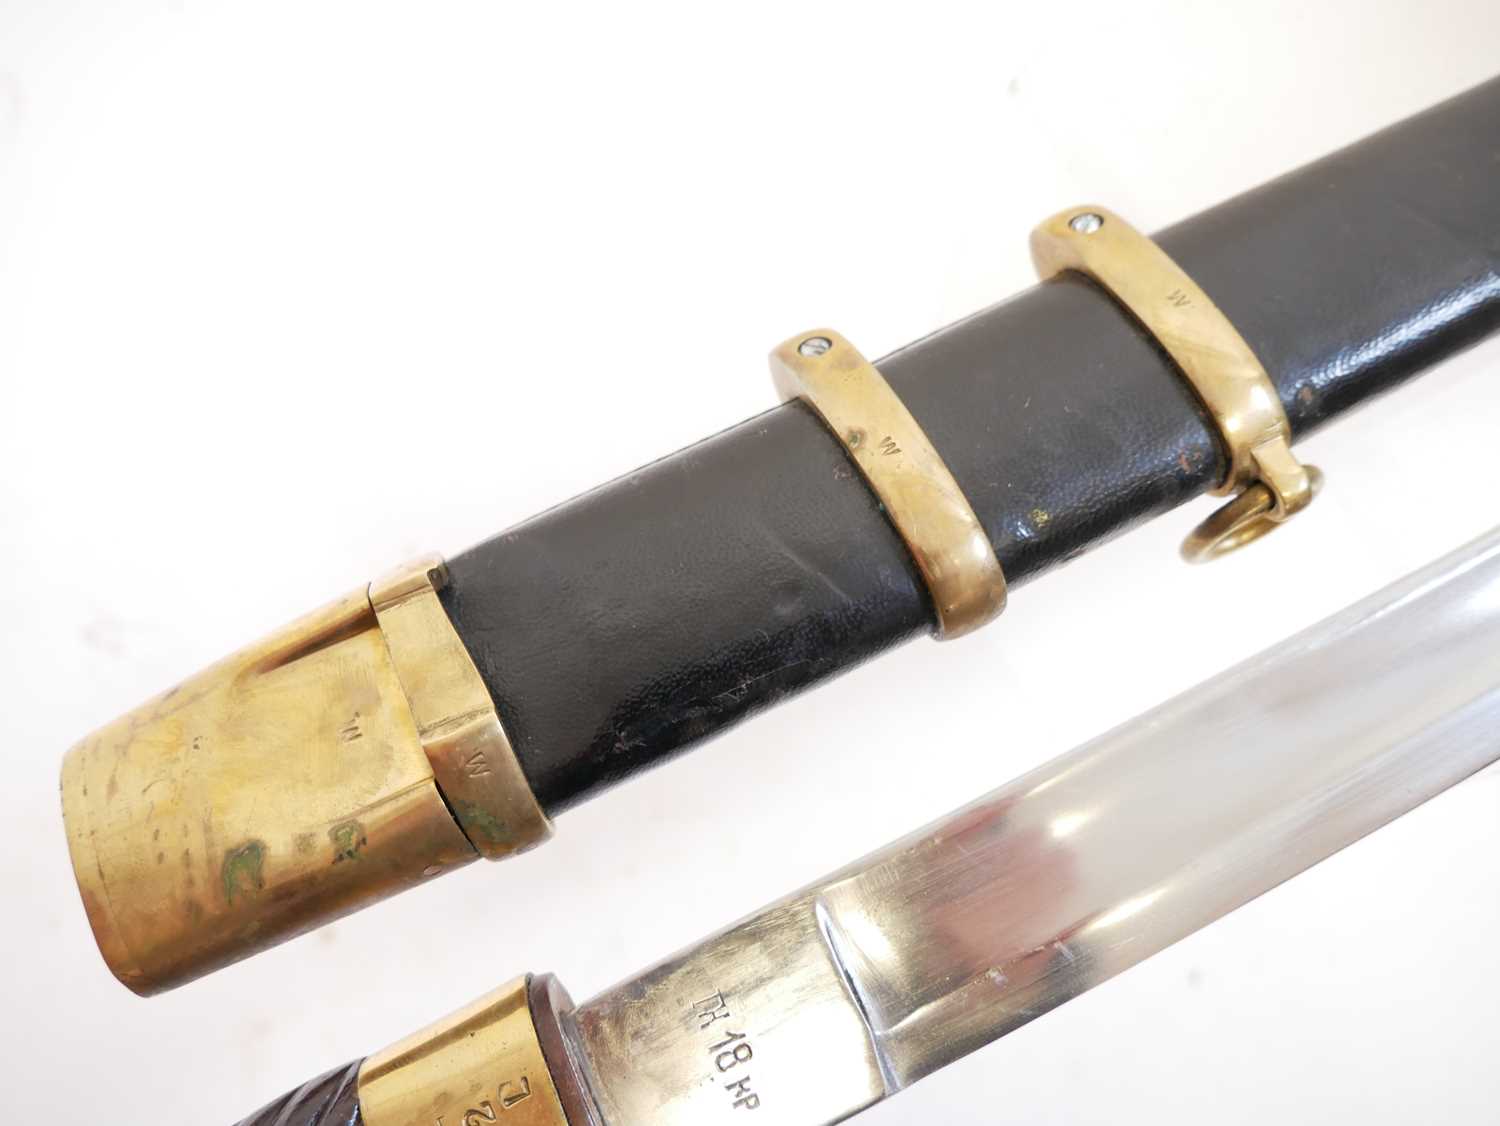 Reproduction copy of a Russian Cossak Shaska sword and scabbard. Buyer must be over the age of 18. - Image 6 of 9